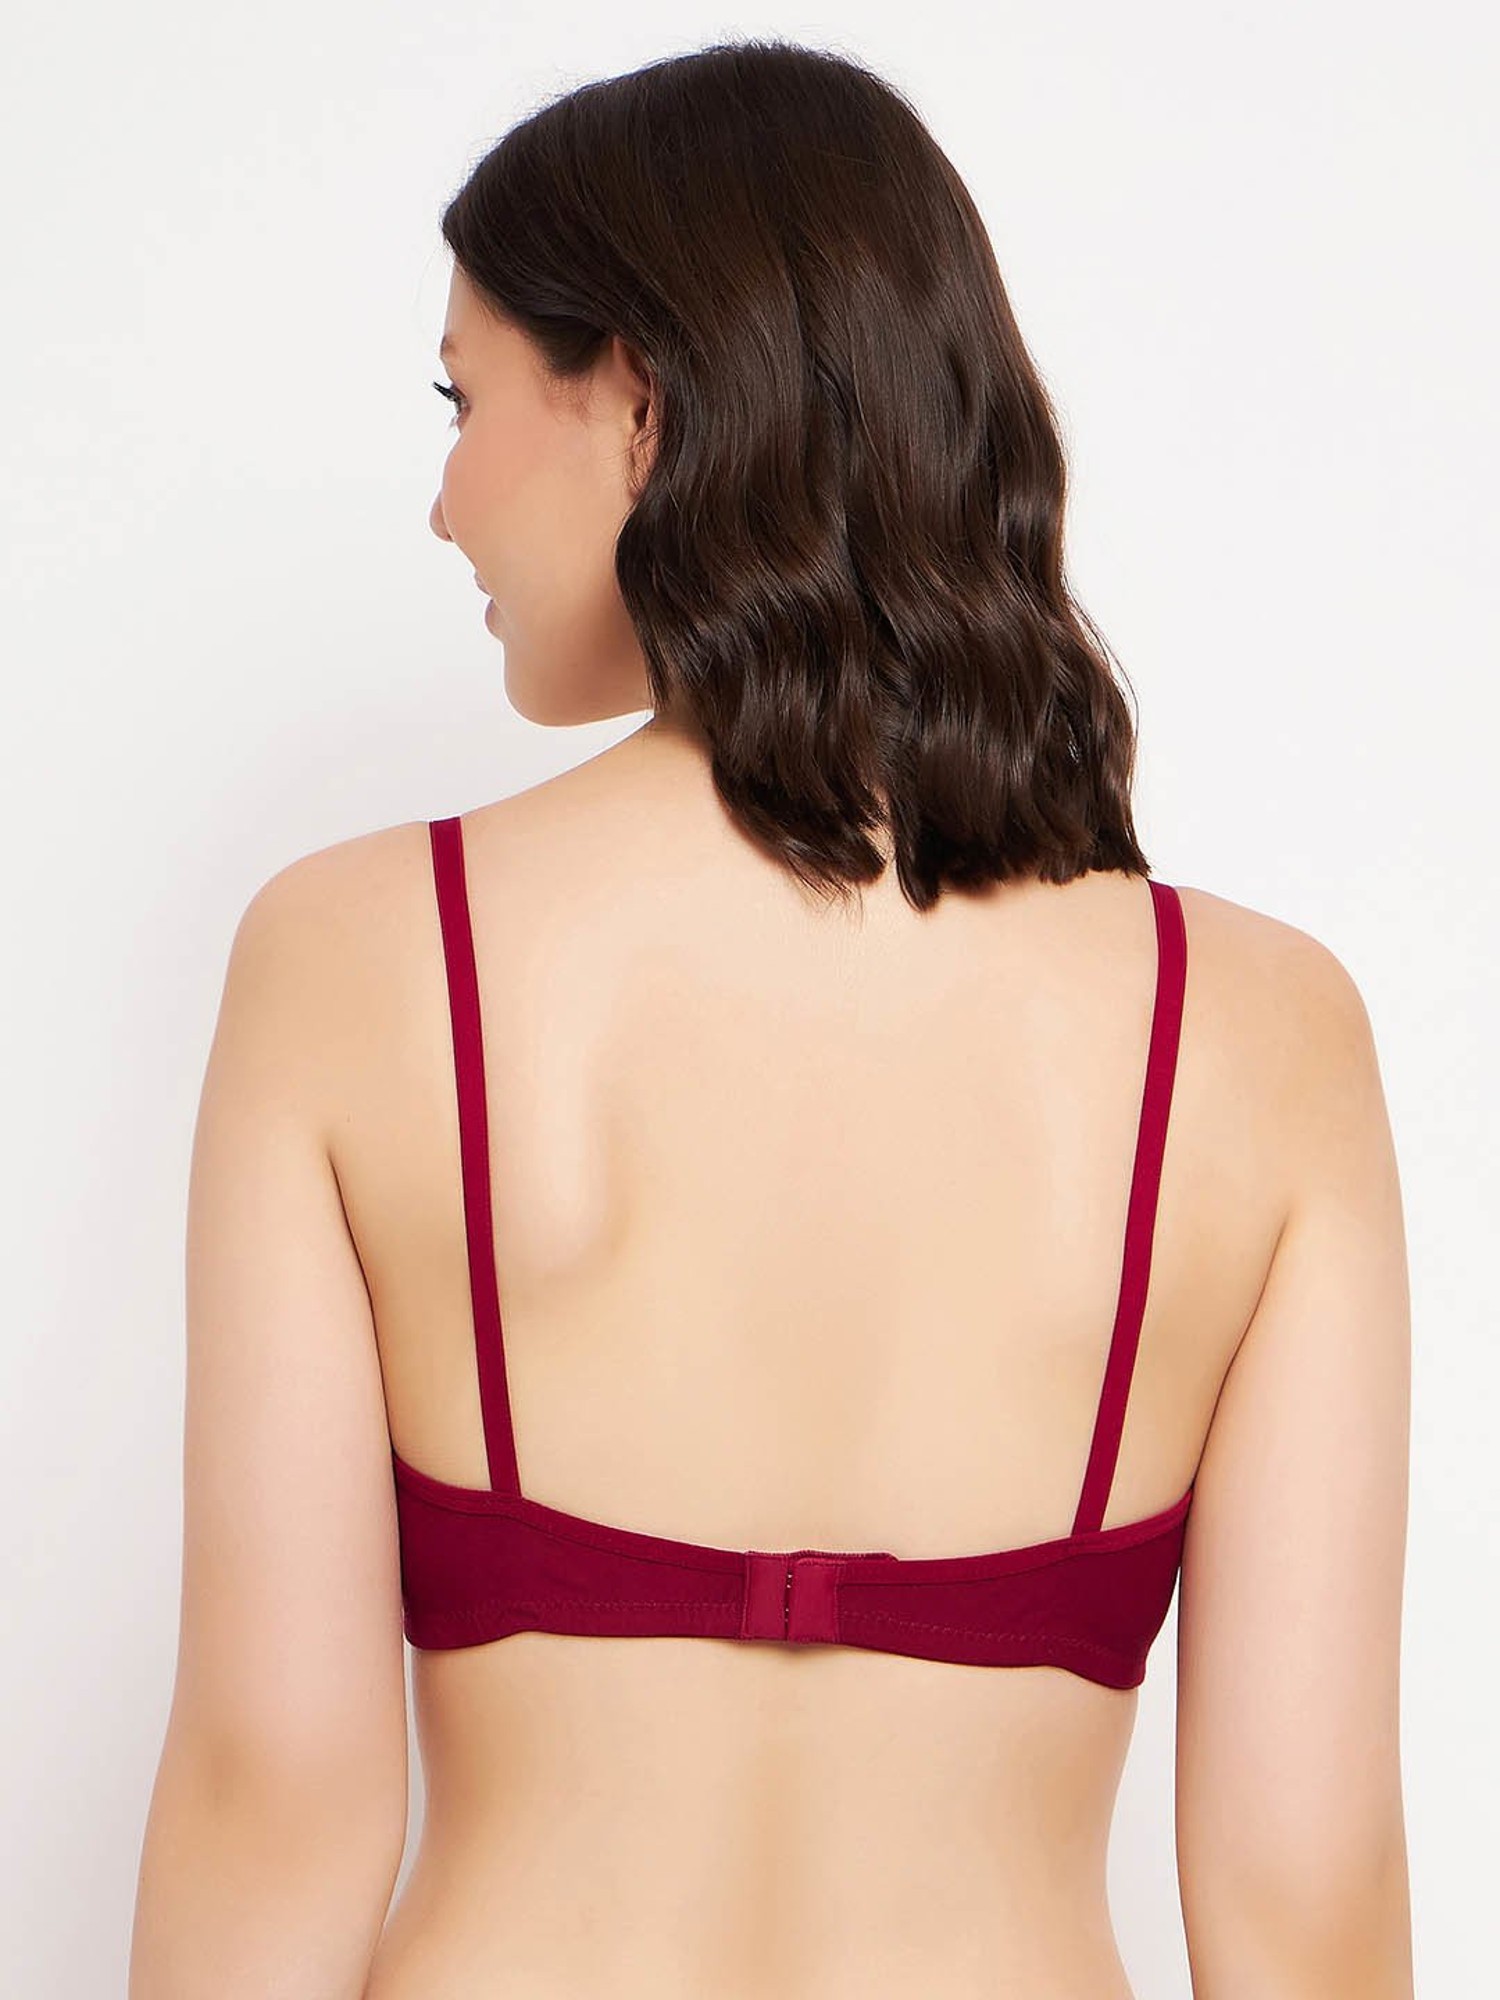 Buy Padded Non-Wired Full Cup Blouse Bra in Maroon - Lace Online India,  Best Prices, COD - Clovia - BR2171P09